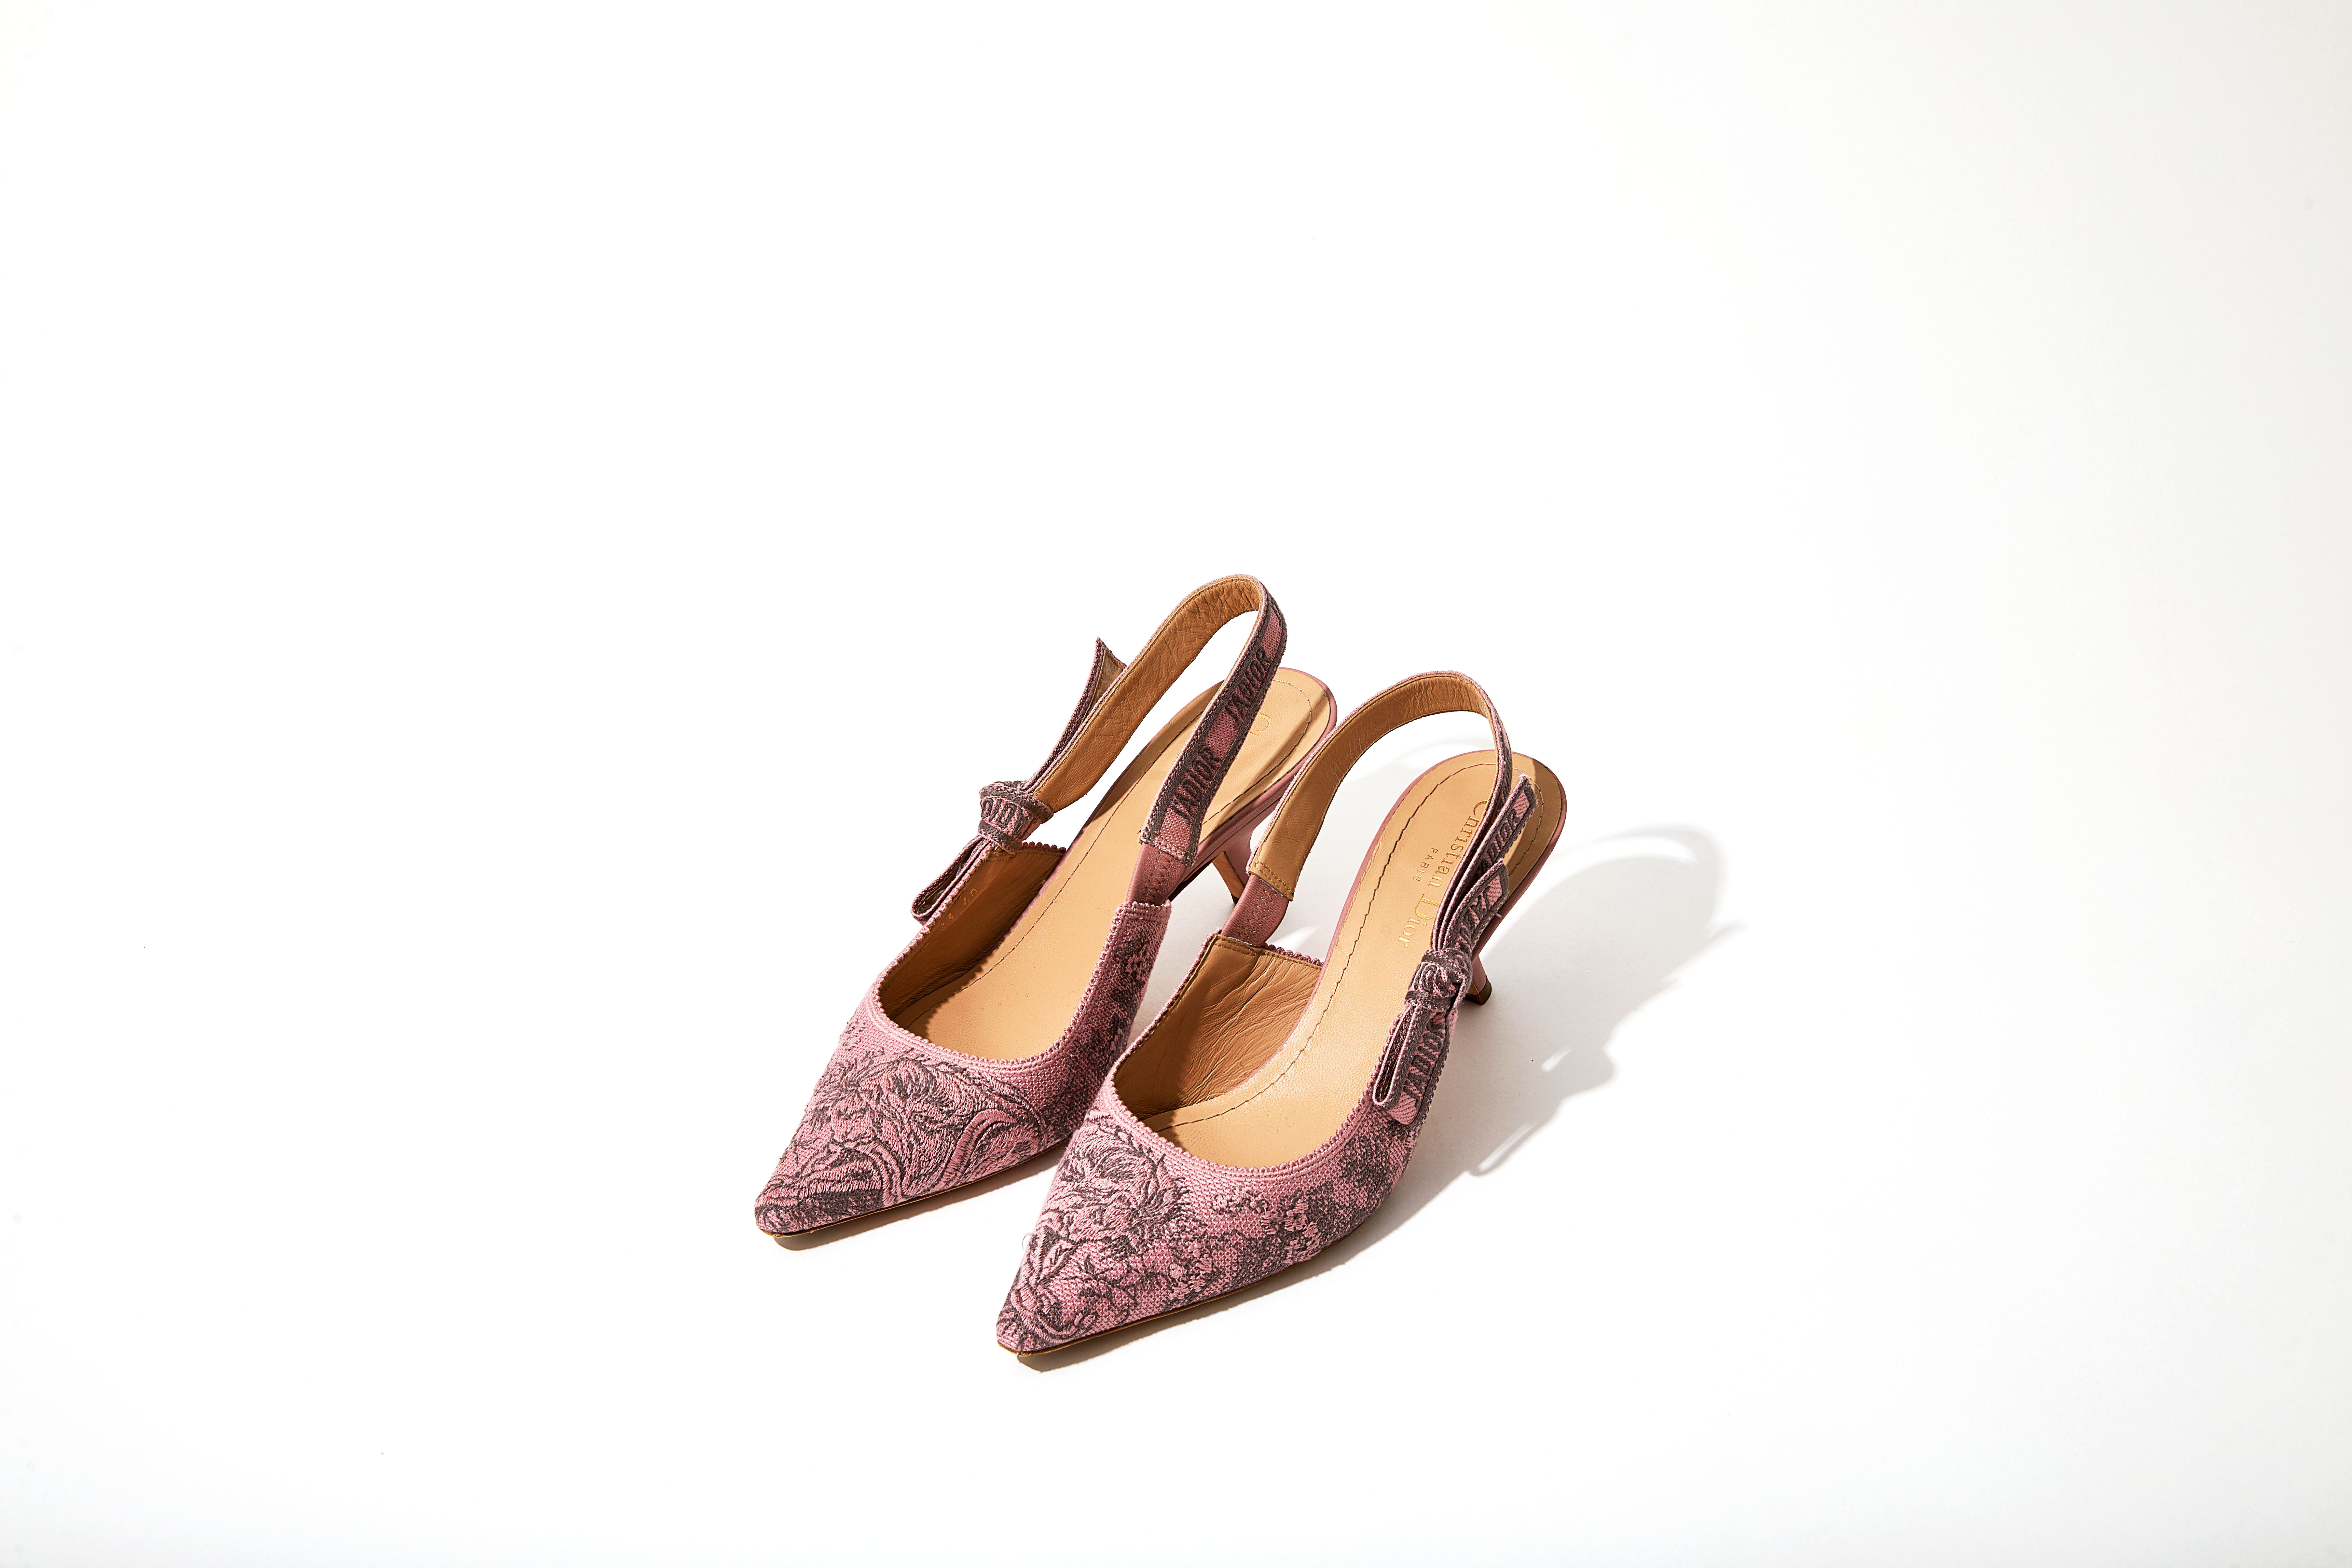 Jadior-Slingback-Pump-in-Pink-And-Gray-Embroidered-Cotton-with-Toile-De-Jouy-Sauvage-Motif-Dior